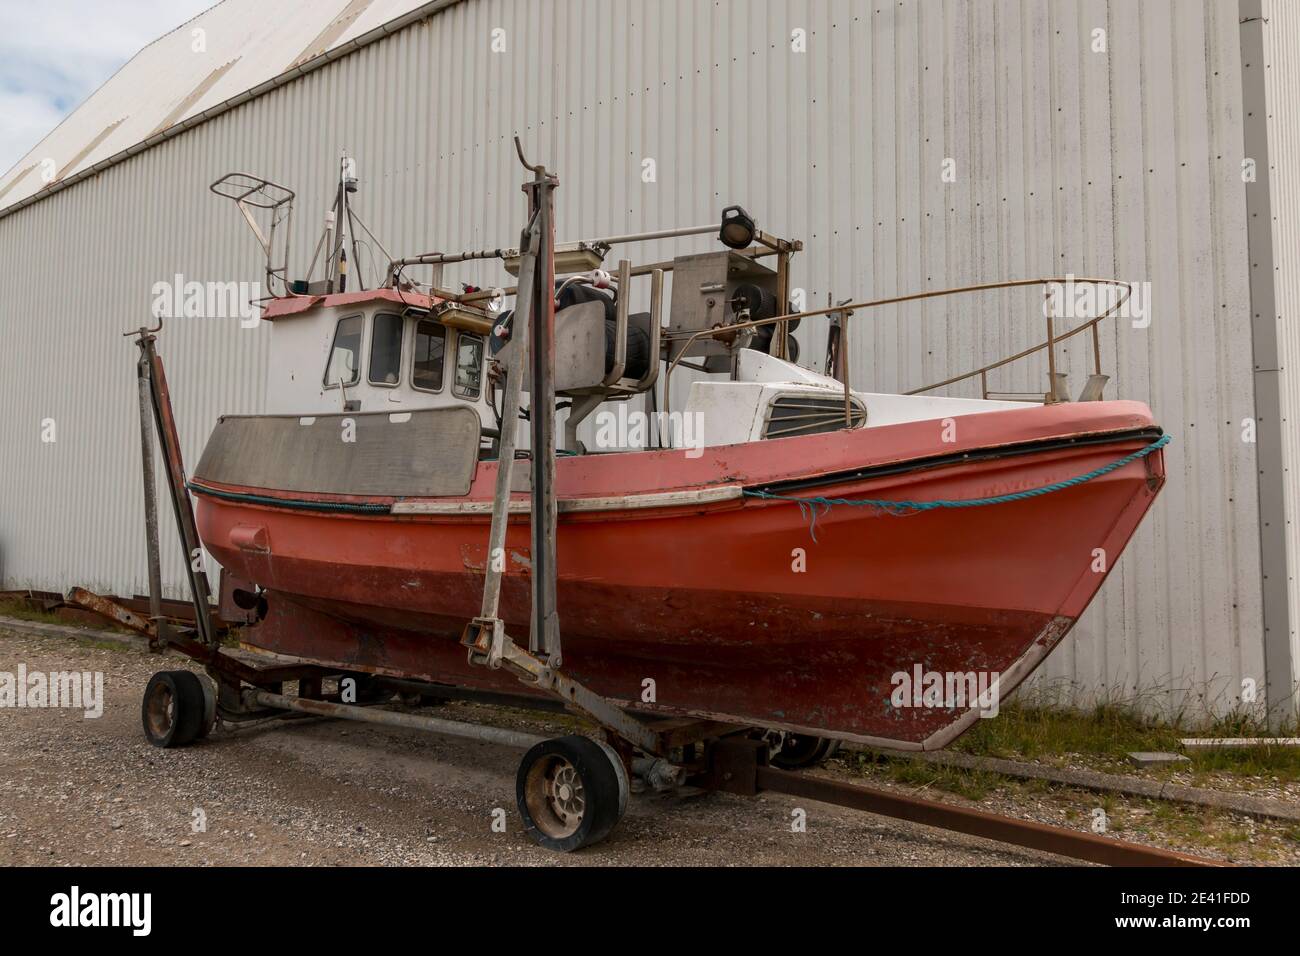 Bonnerup, Denmark - 15 juli 2020: Red fishing cutters lie in the dock and are being repaired, Stock Photo